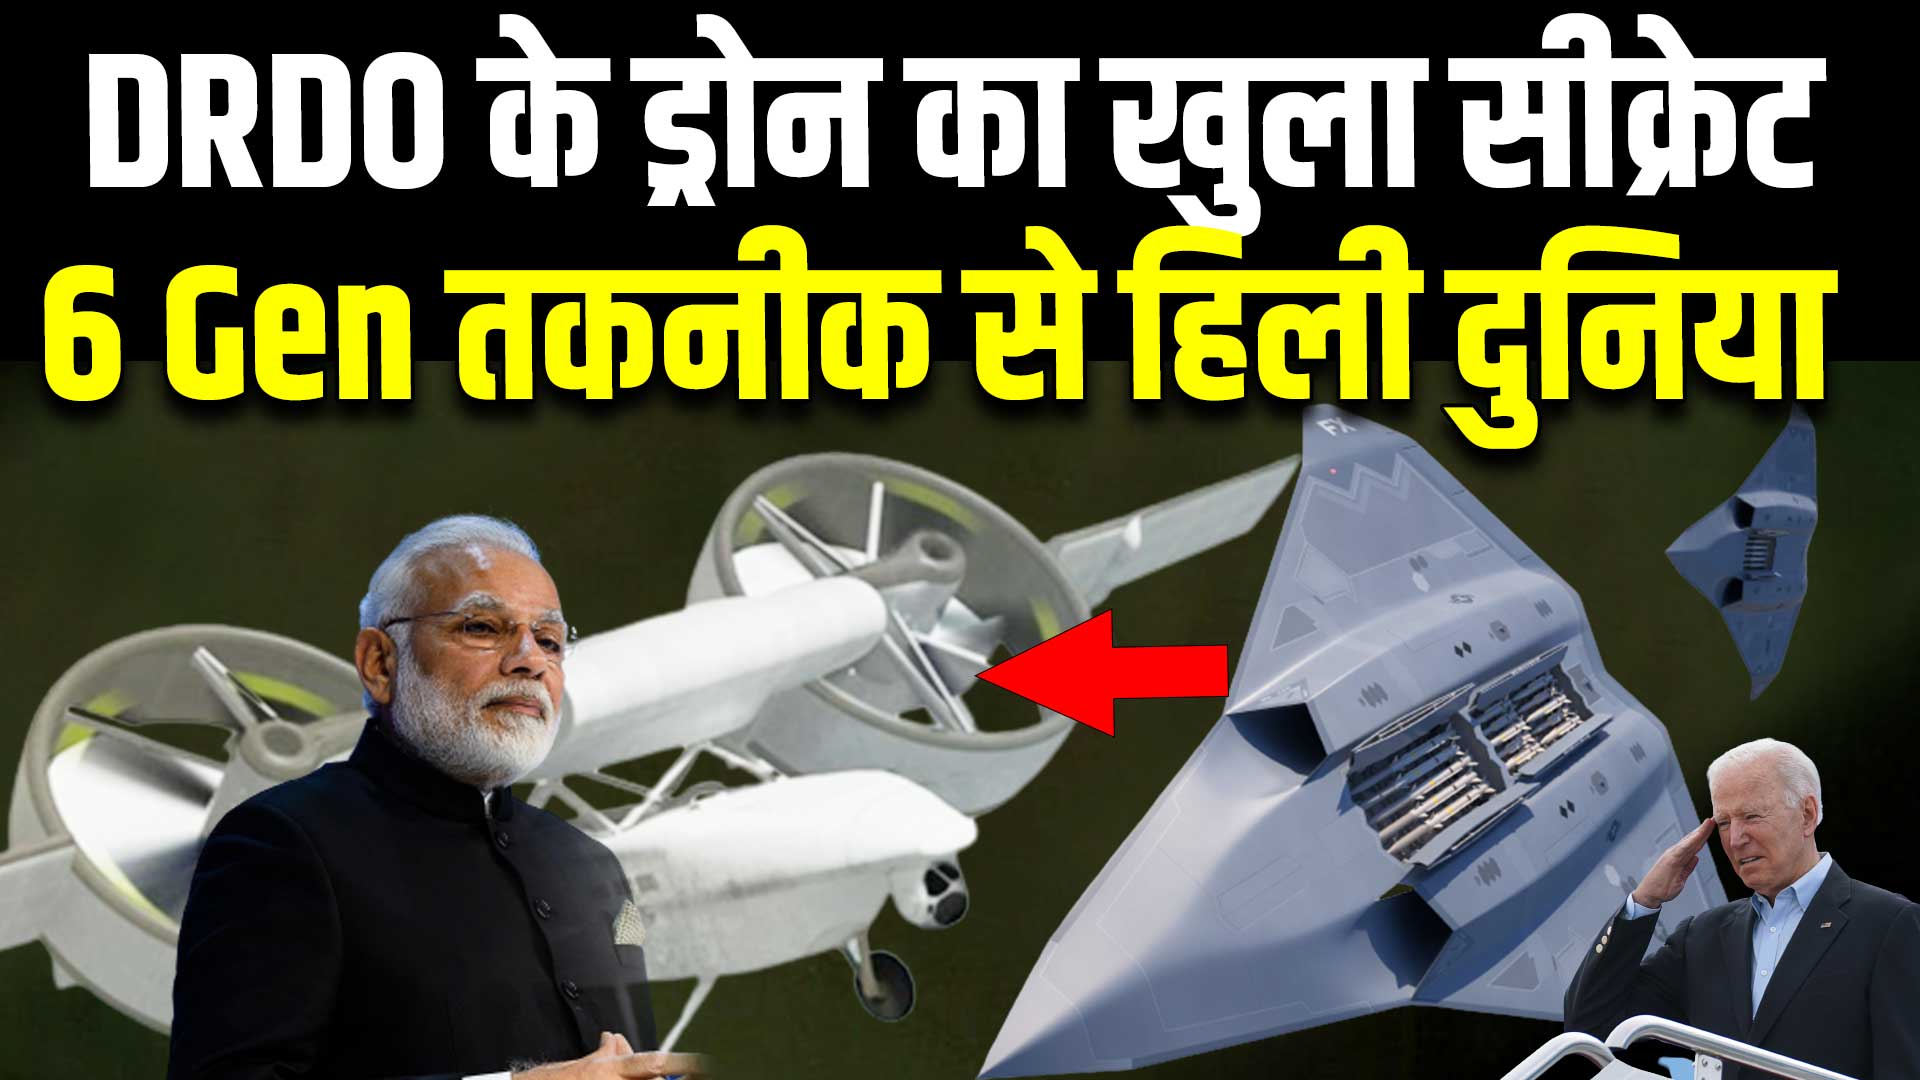 India's new drone technology on boom